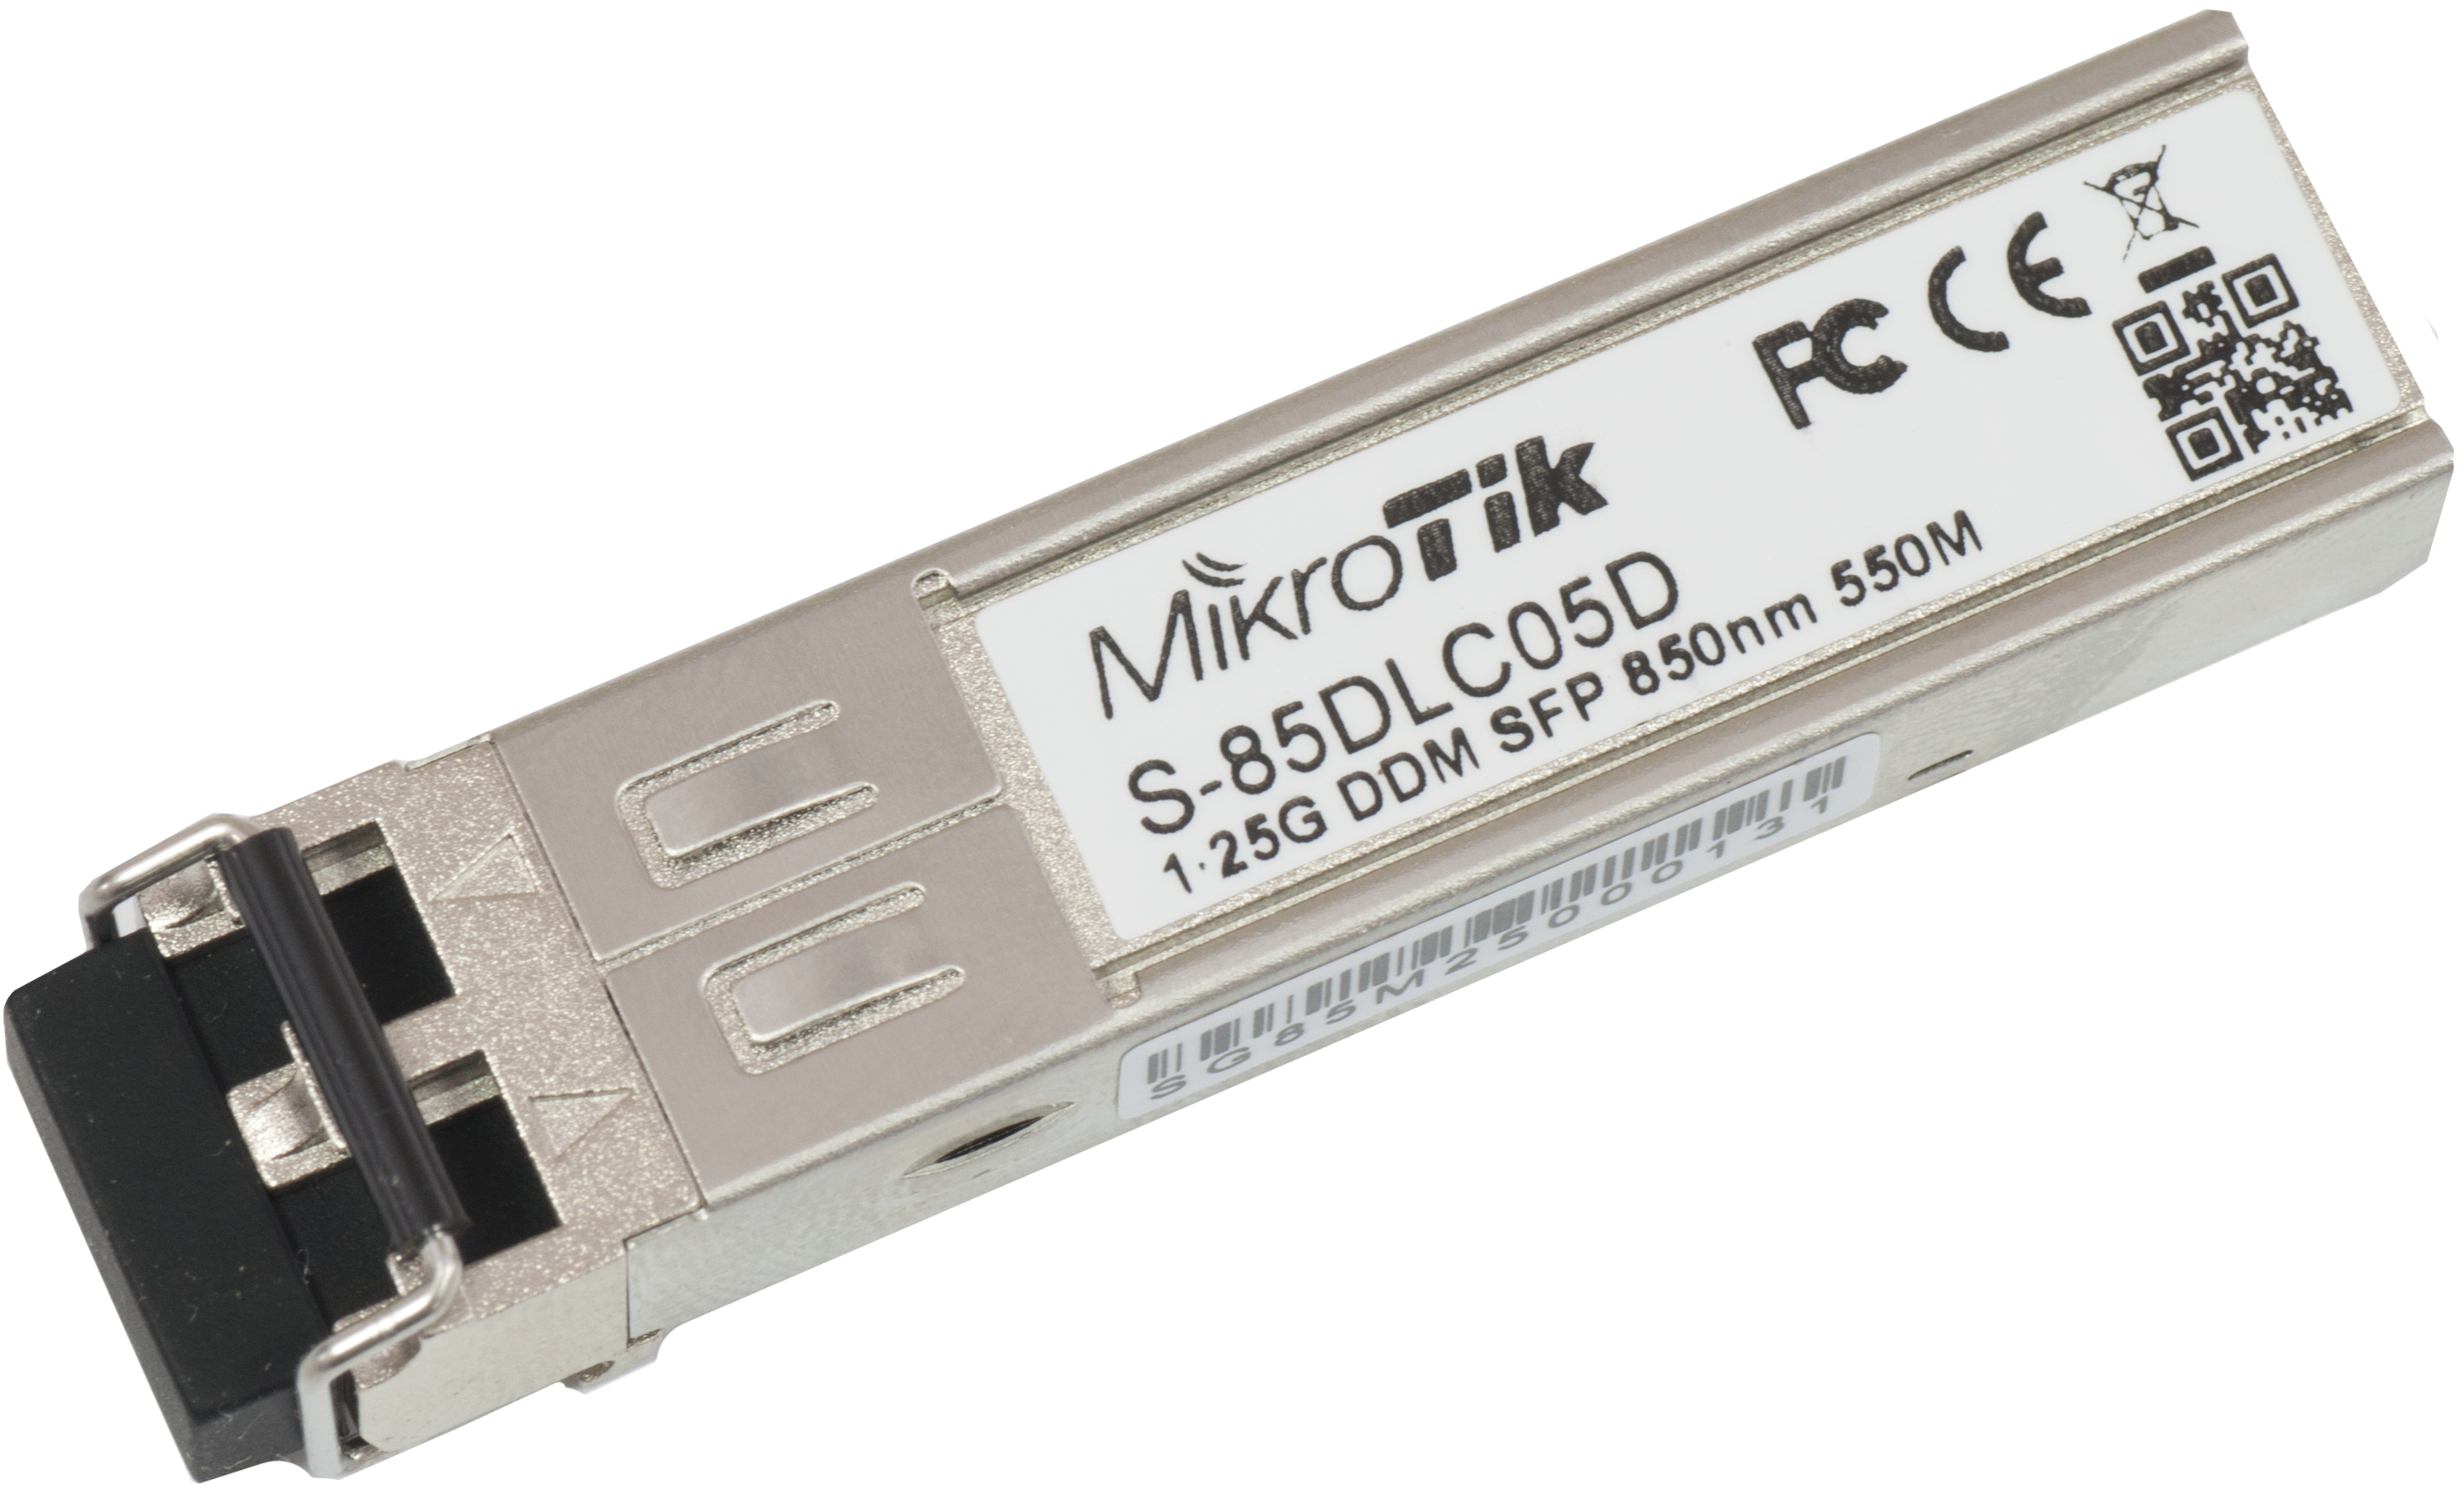 MikroTik Routers and Wireless - Products: S-85DLC05D